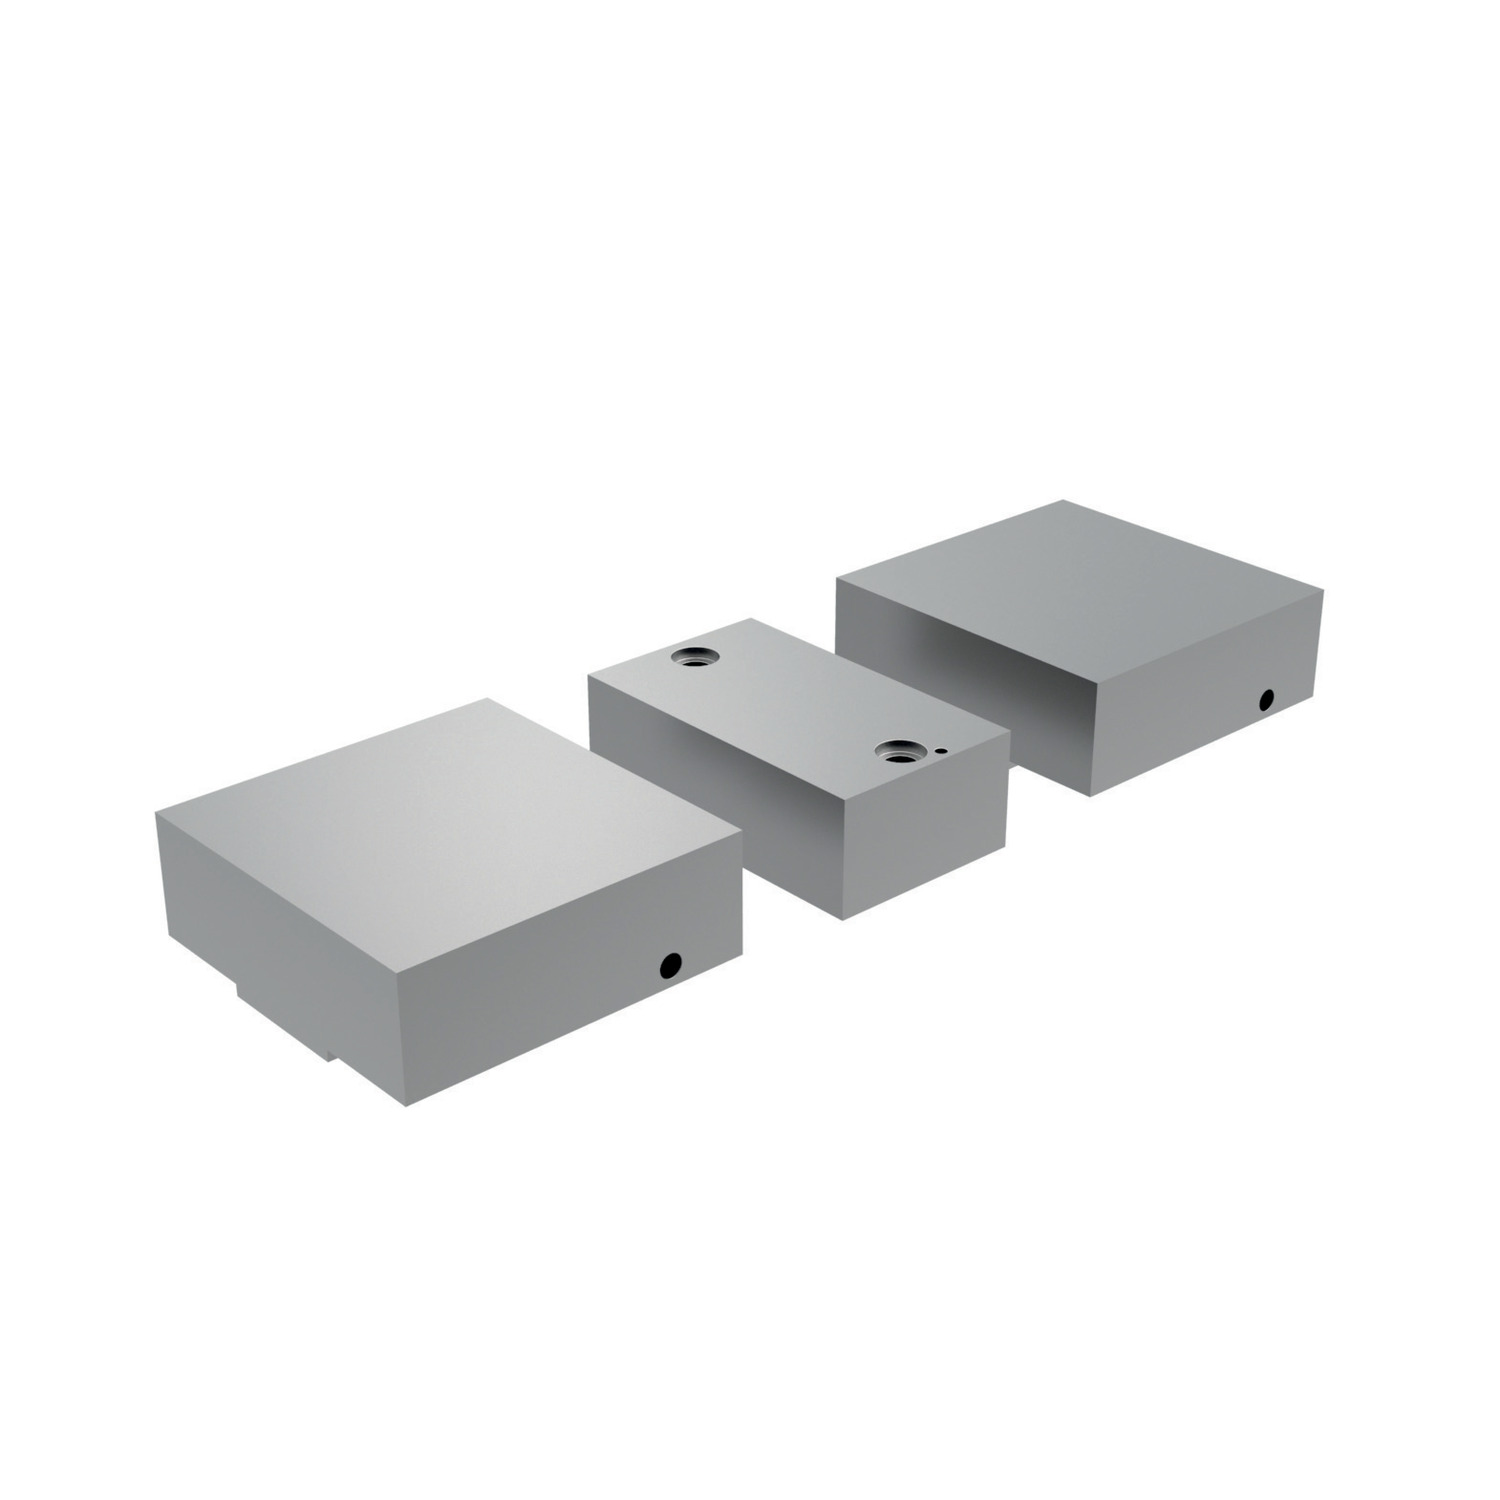 Vice Jaws & Parallels - Snaplock Snaplock machinable vice jaws are reversible for additional workpiece setup. For use with our re-lock vice systems.